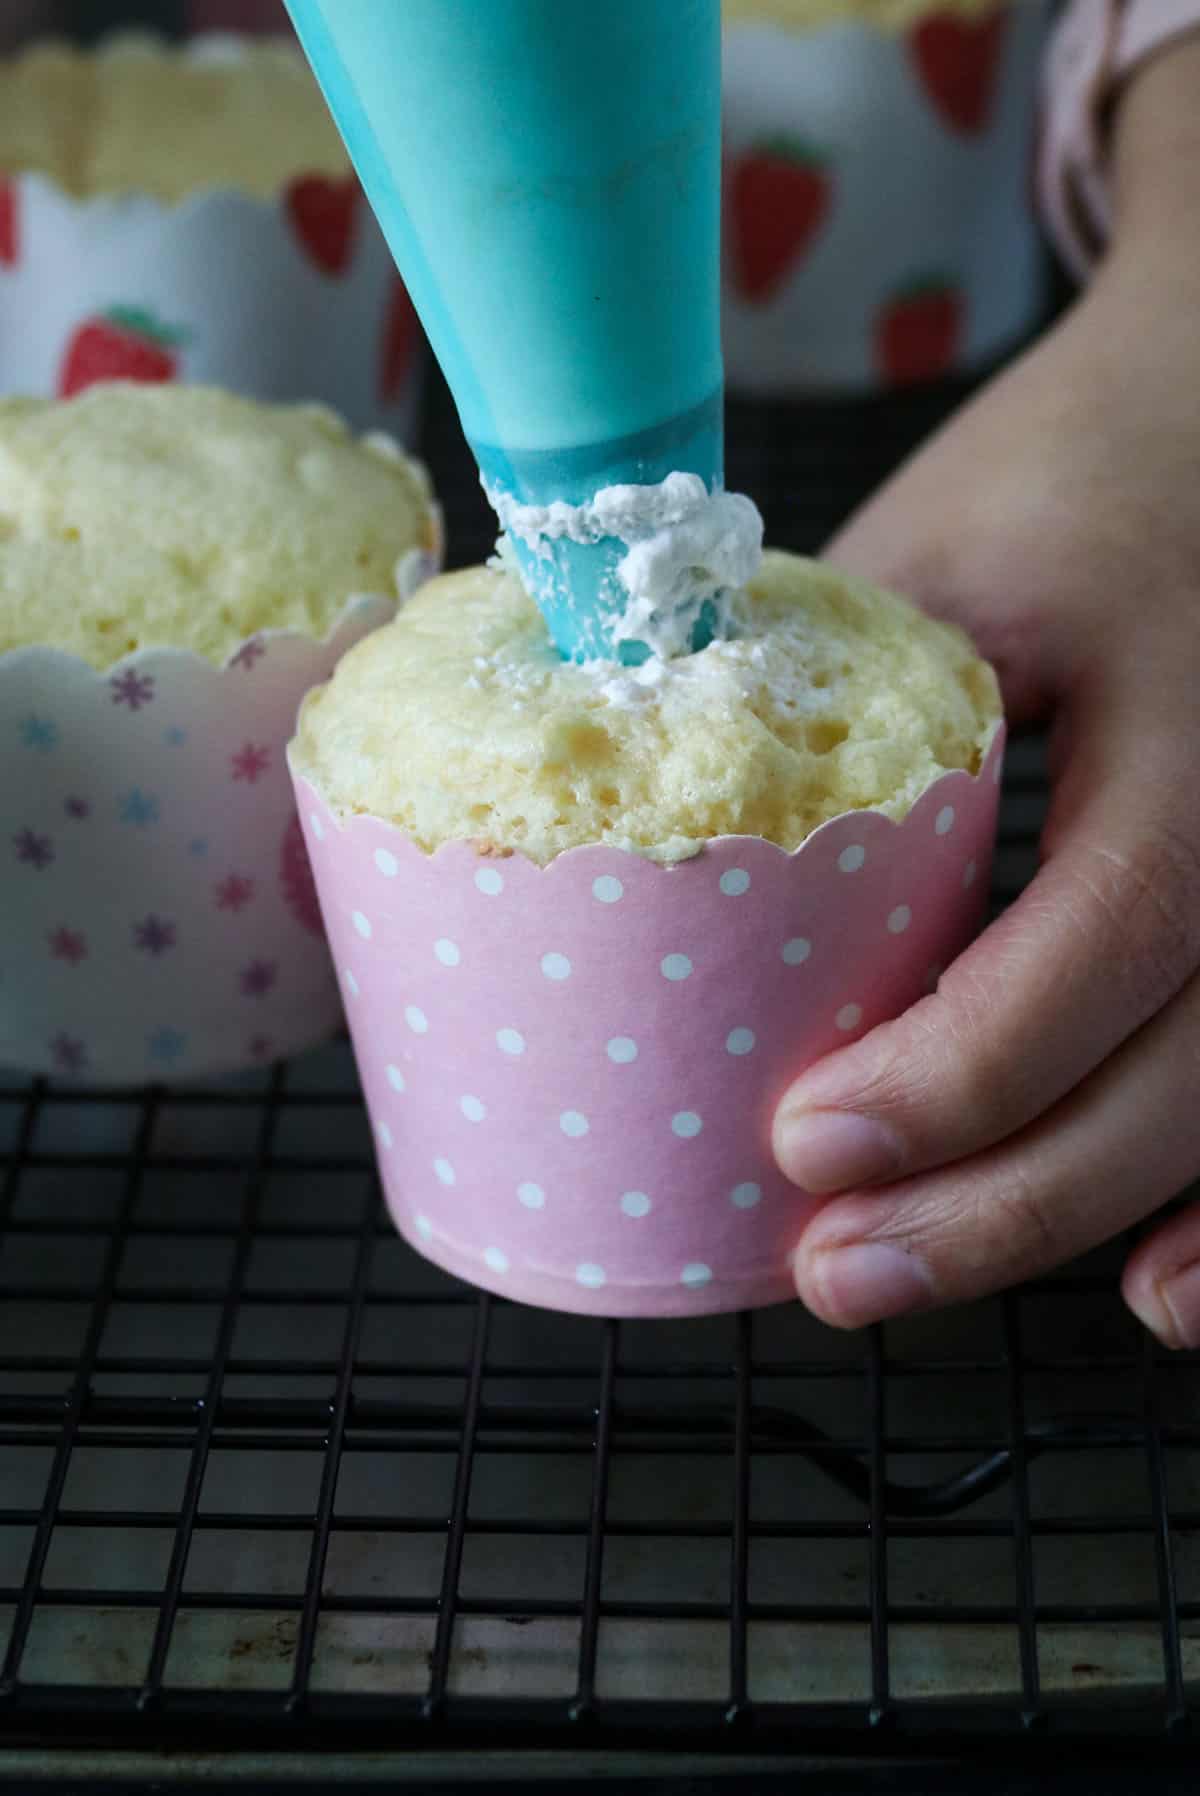 Filling the cupcakes with whipped frosting.